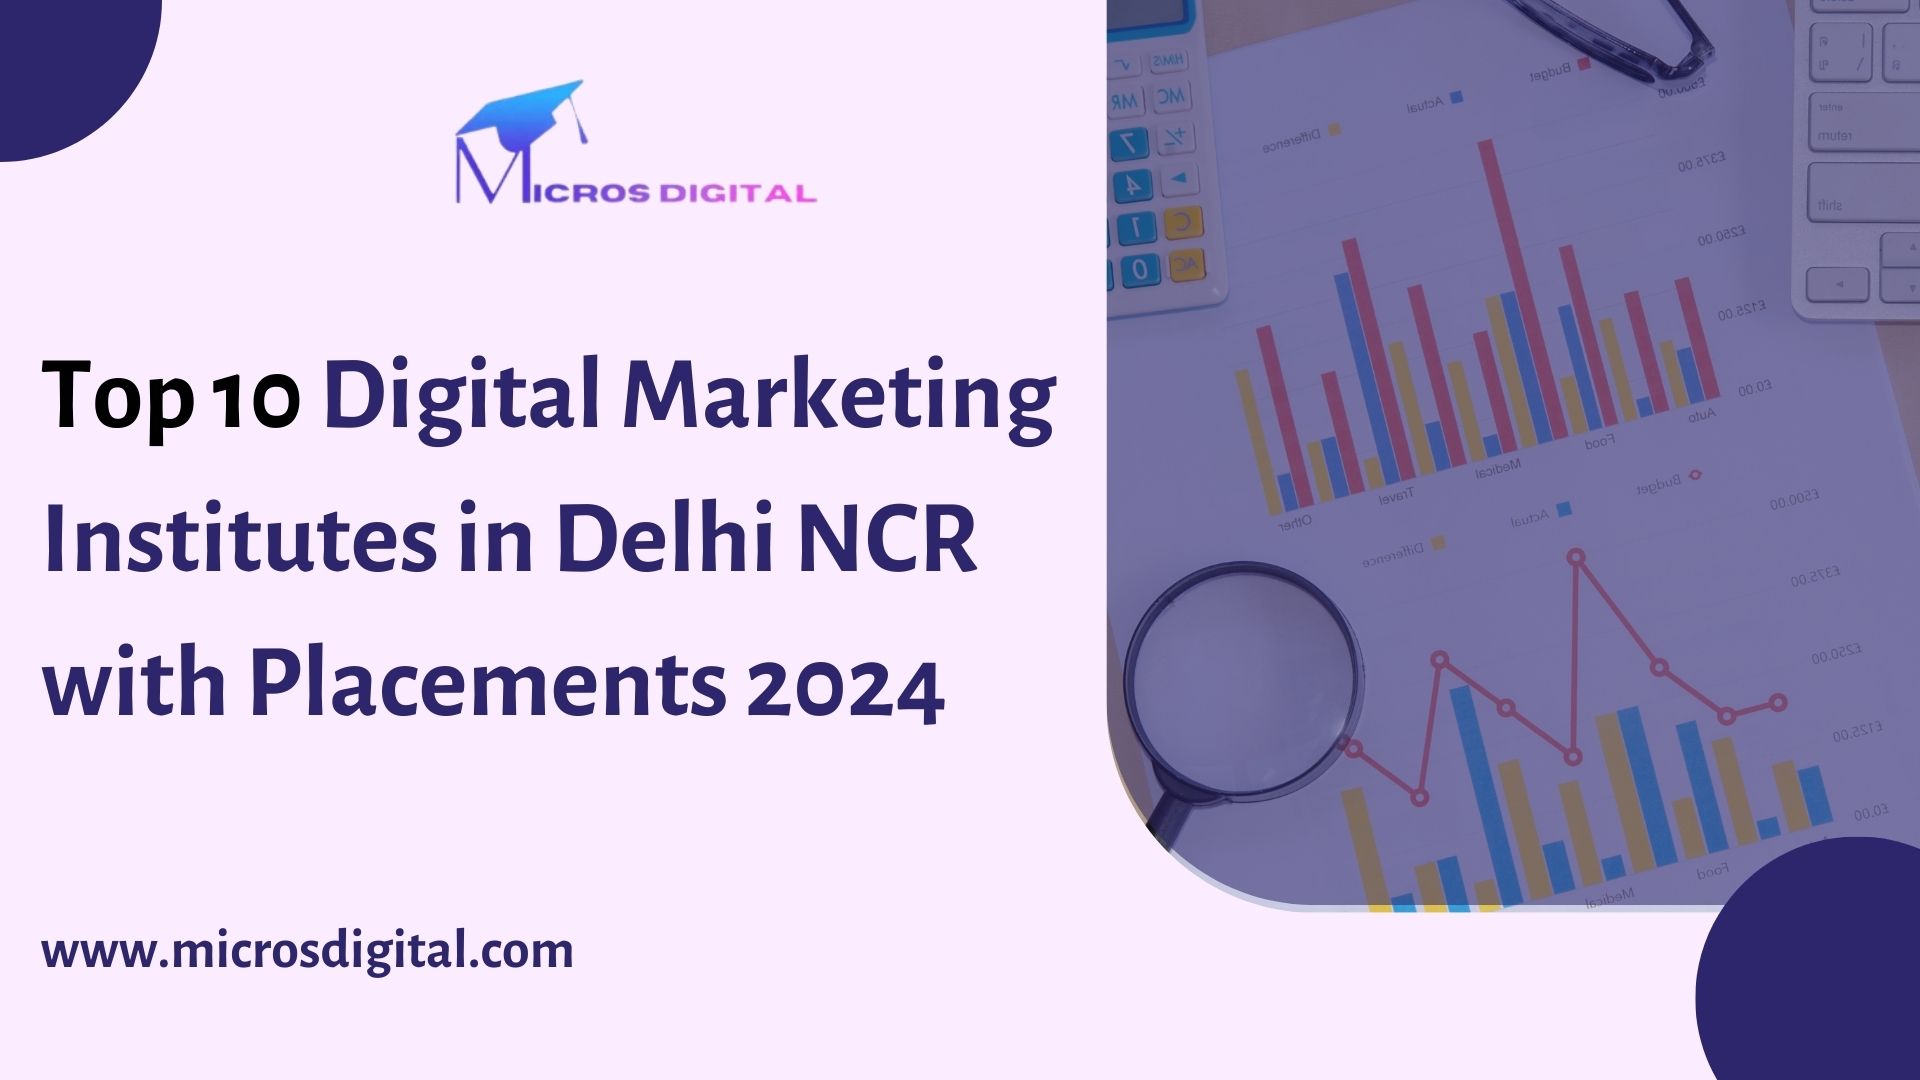 Top 10 Digital Marketing Institutes in Delhi NCR with Placements 2024